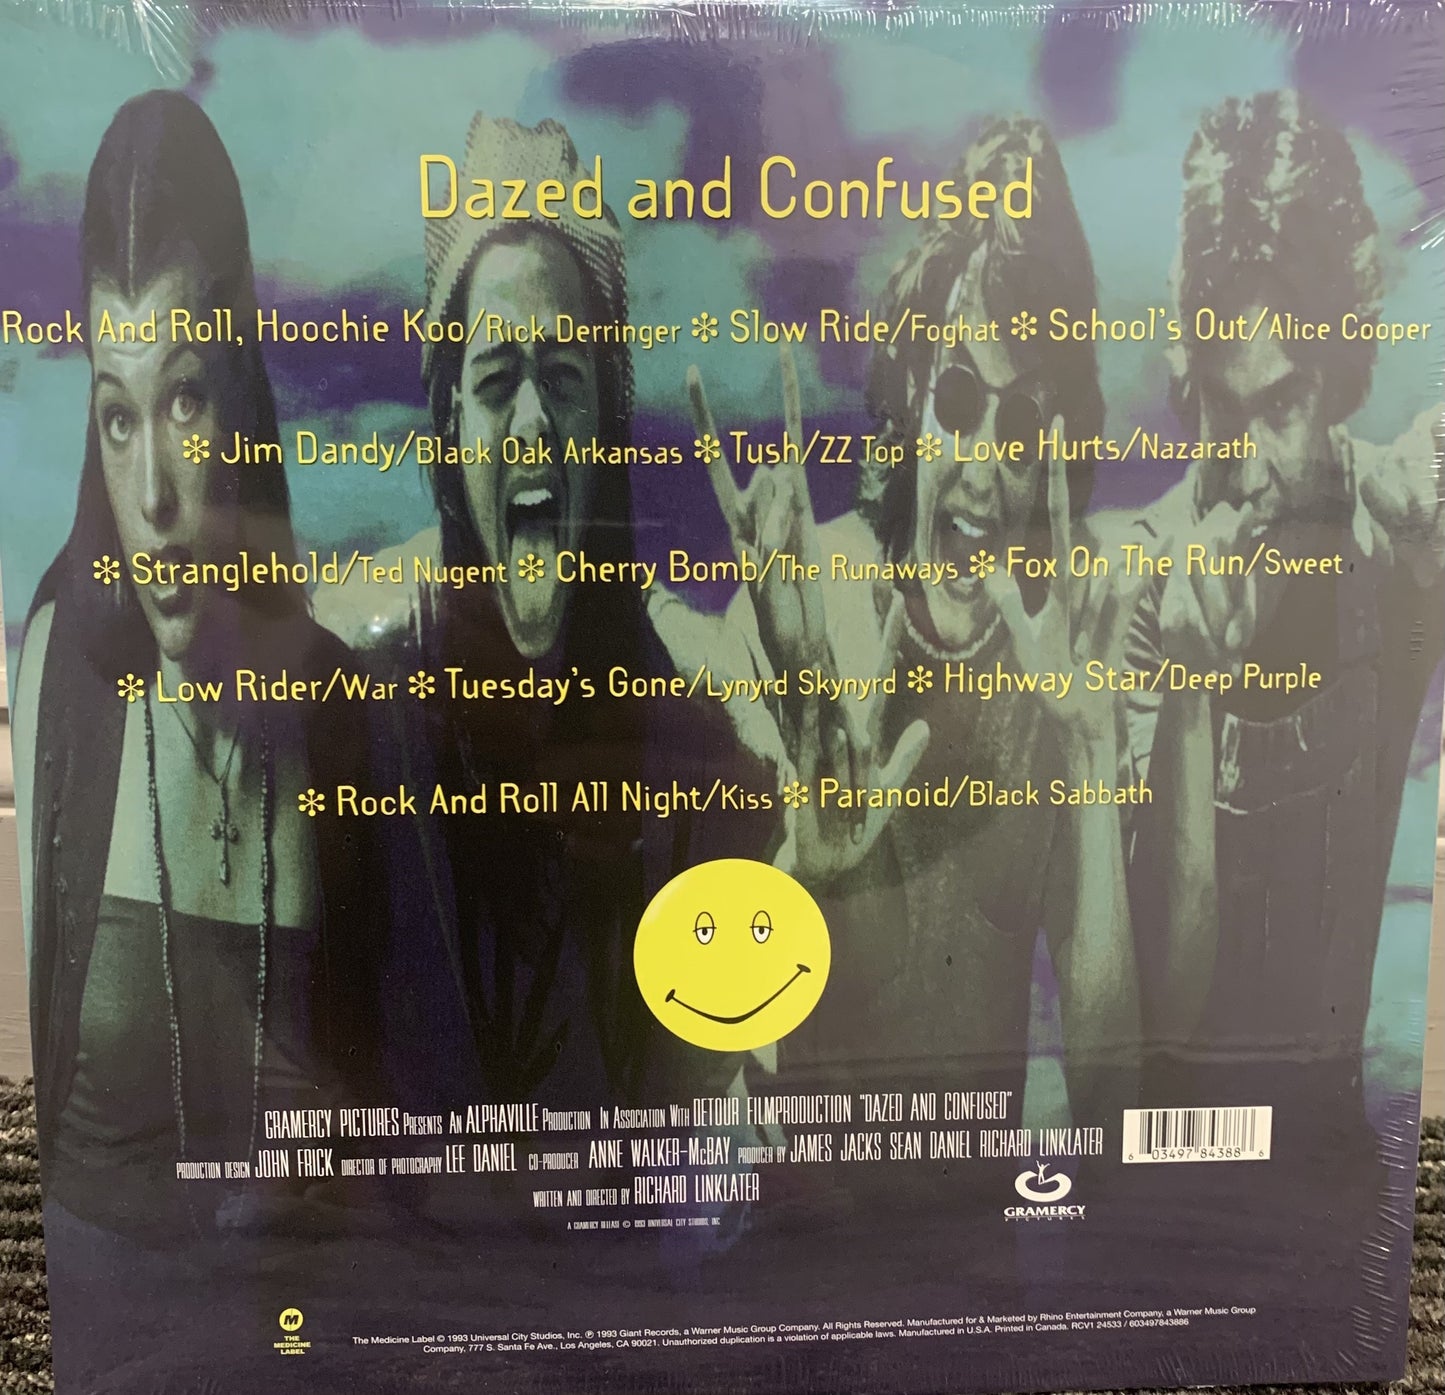 DAZED AND CONFUSED (MUSIC FROM THE MOTION PICTURE) Vinyl LP